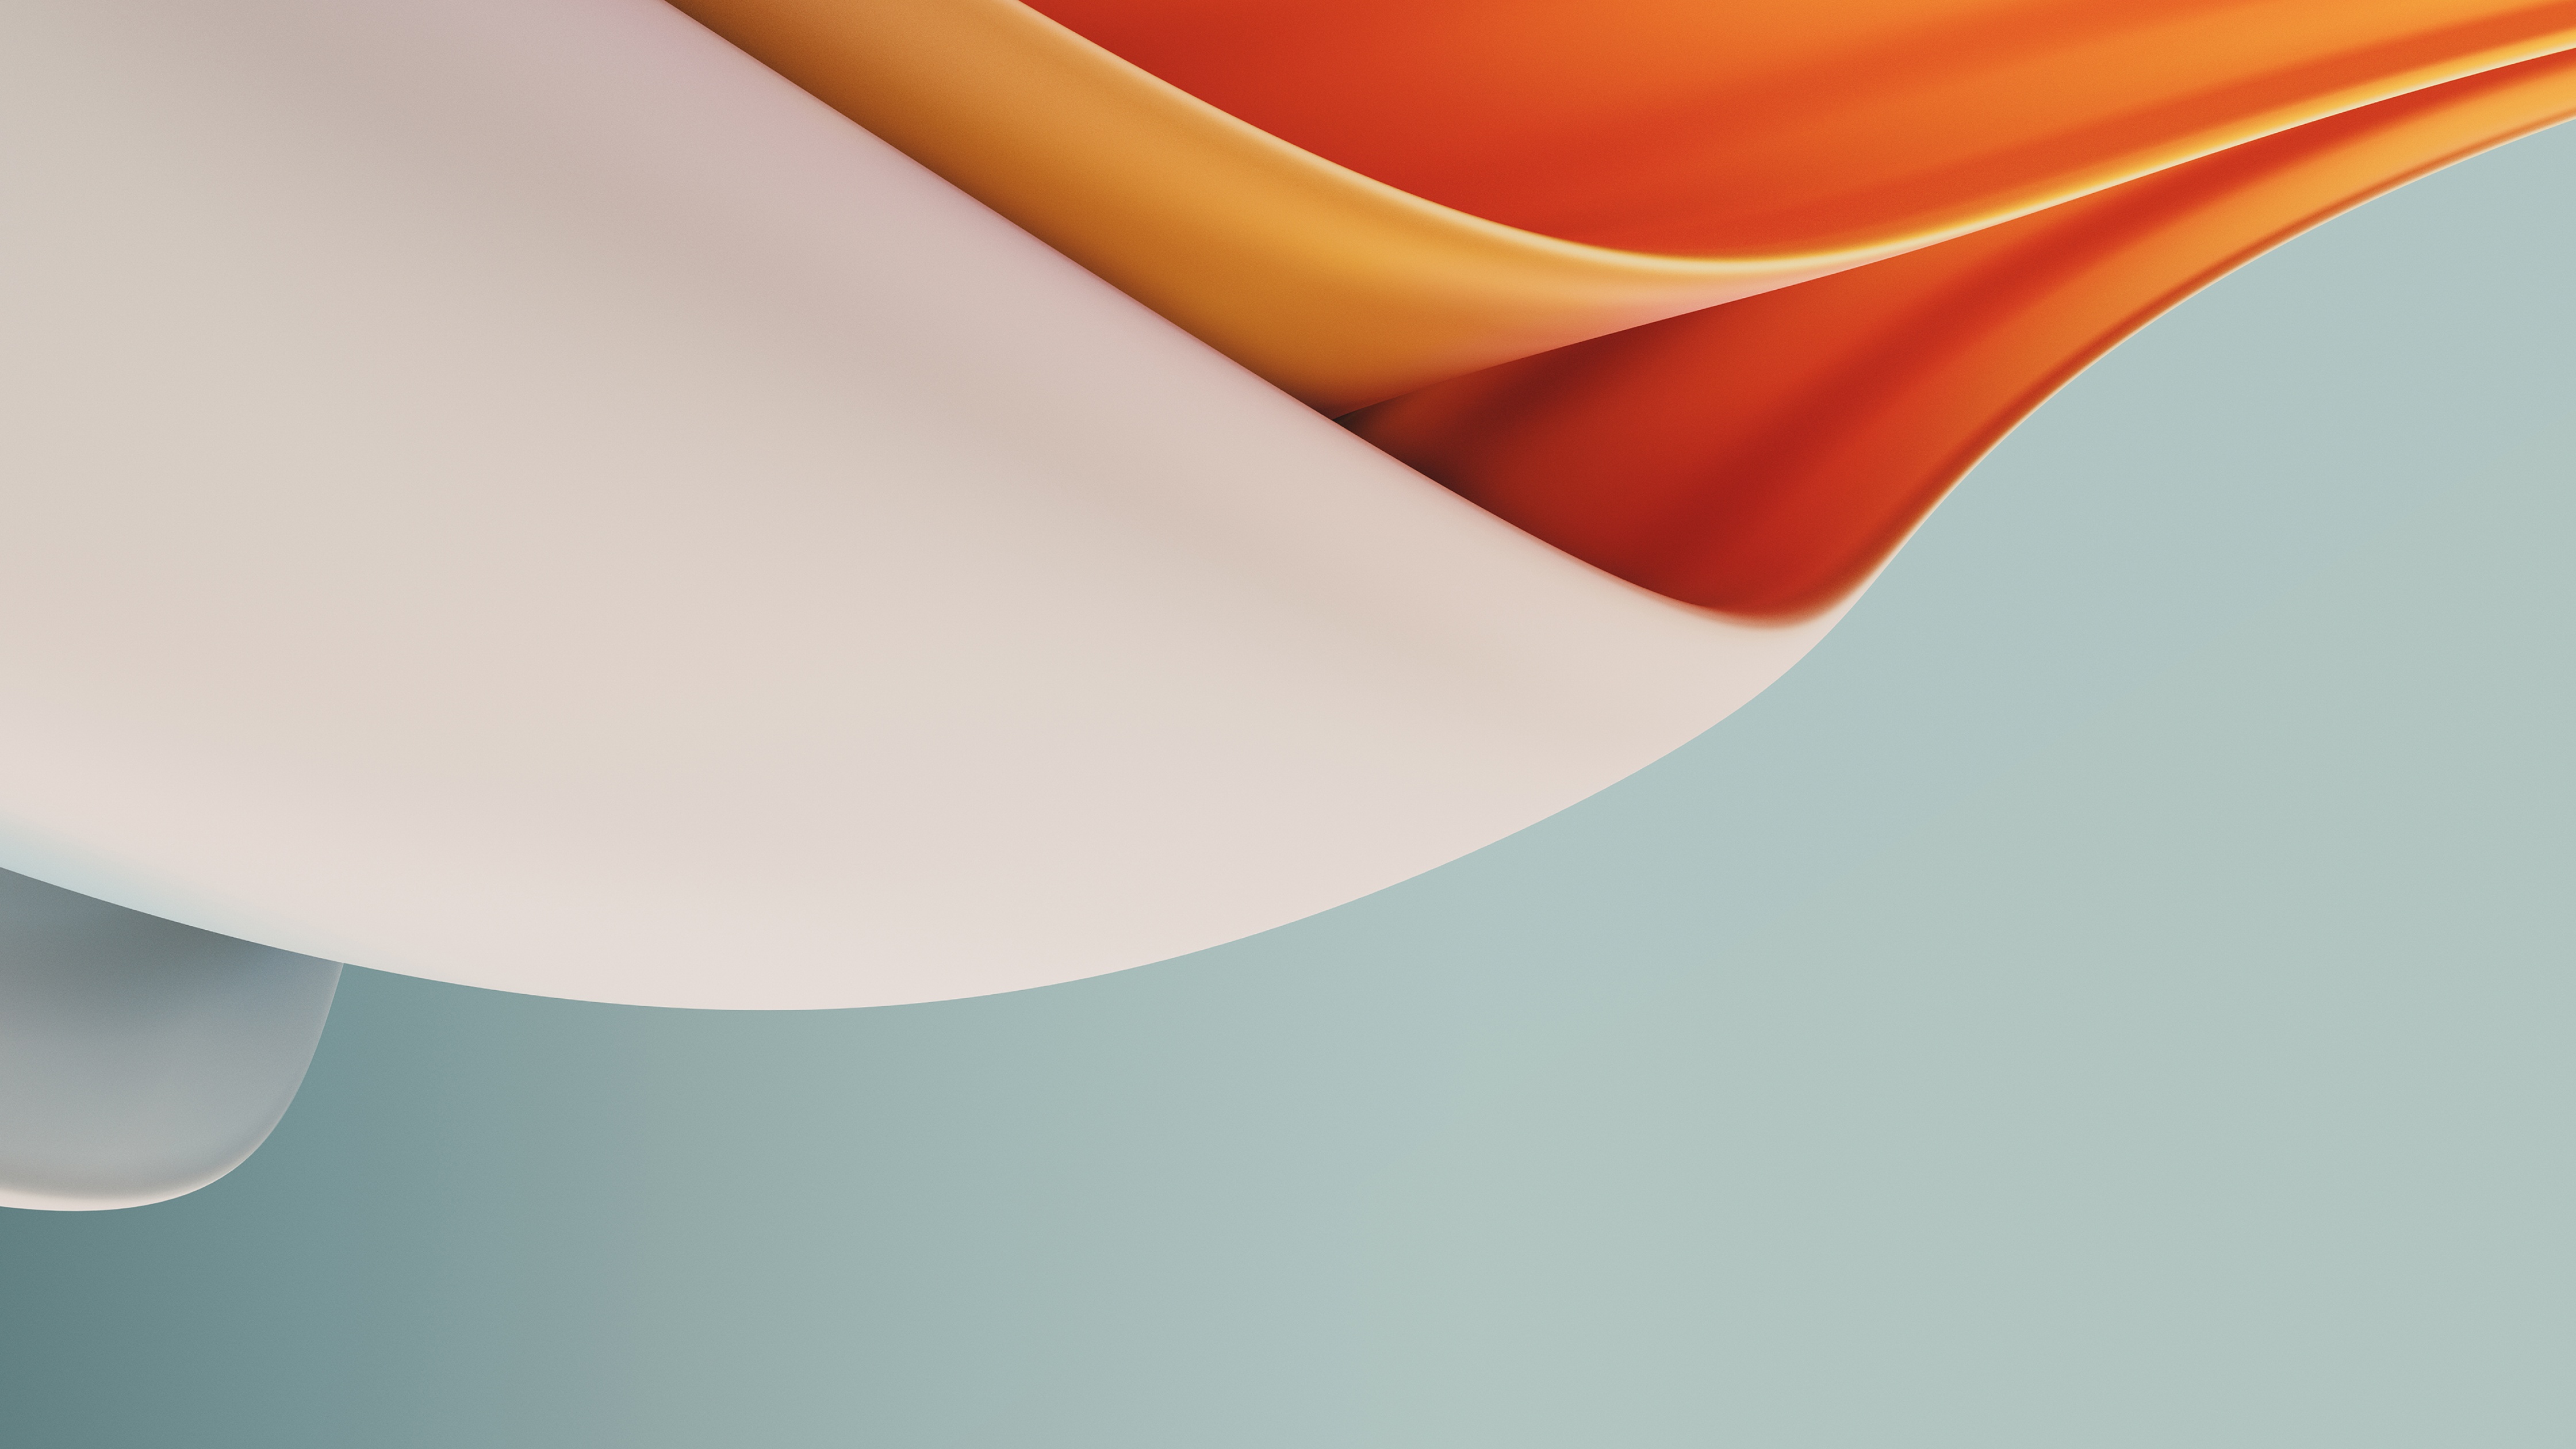 Abstract Waveforms Oneplus One Soft Gradient White Orange Gray Waves 4480x2520